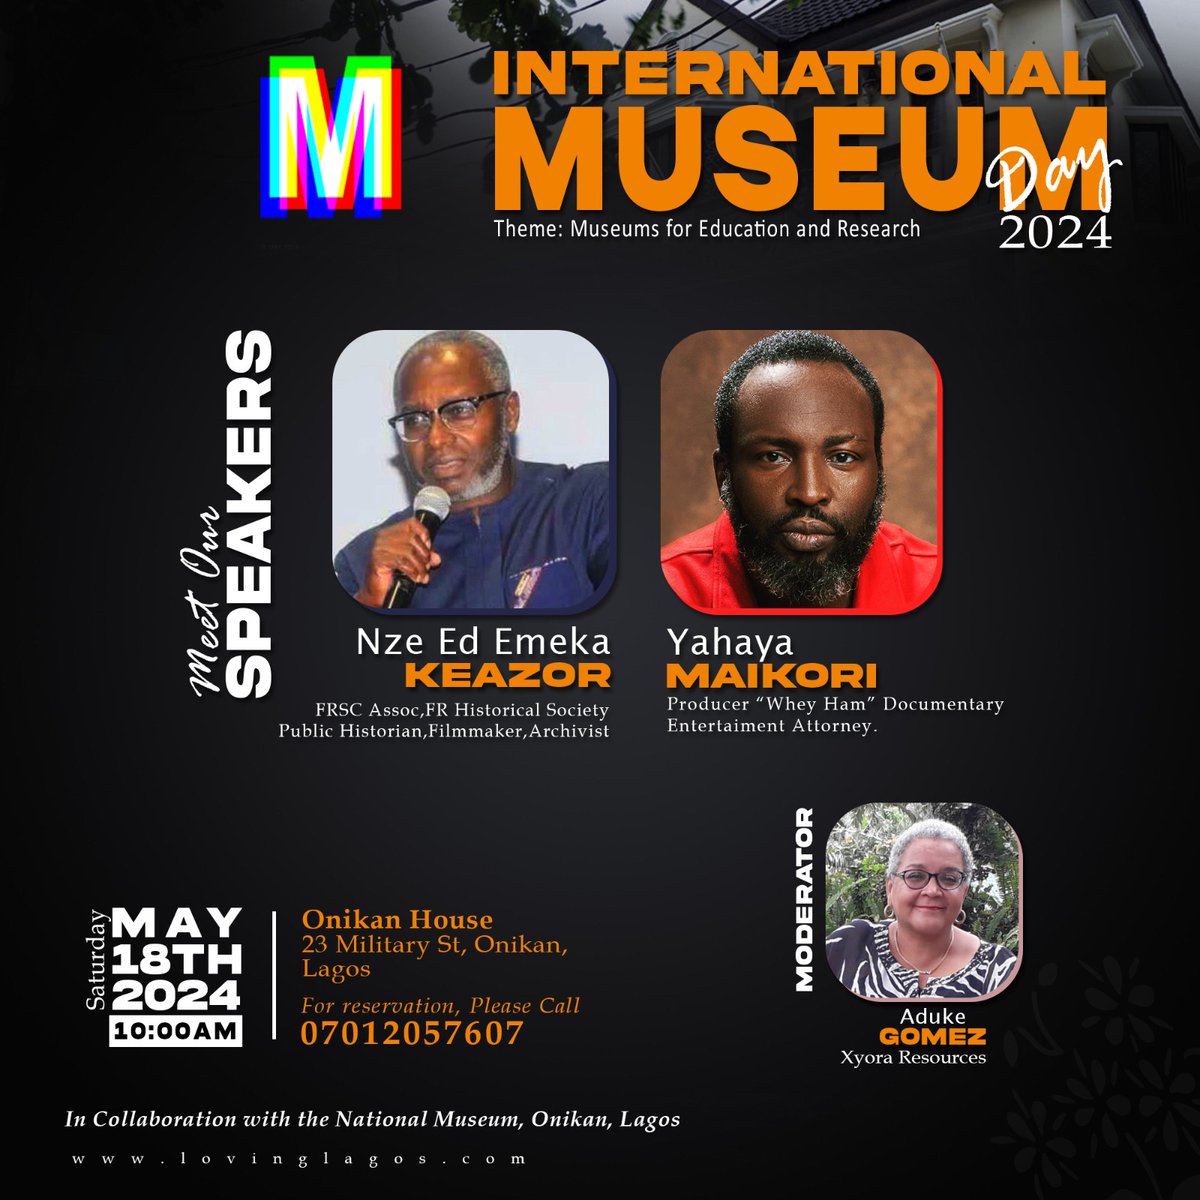 Looking forward to engaging @edkeazor and Yahaya Maikori to celebrate International Museum Day with @lovinglagos at Onikan House this Saturday 18 May. Exhibition opens at 10am. Talks begin at 1pm. Do join us! There's a virtual option if you're far away...